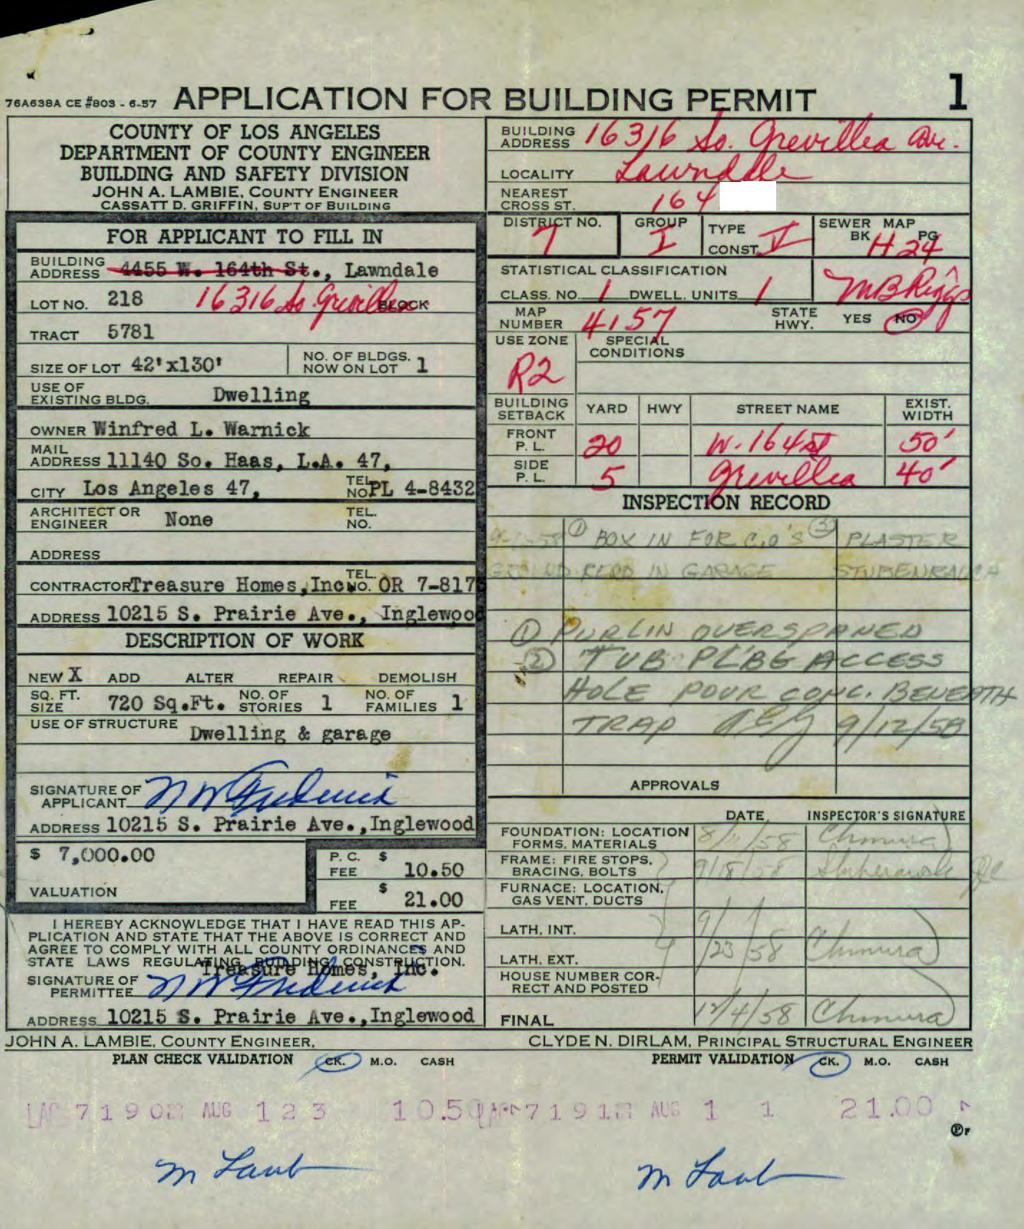 APPLICATION FOR BUILDING PERMIT 1 DEPARTMENT OF COUNTY ENGINEER JOHN A. LAMBIE. COUNTY Engineer CASSATT D. GRIFFIN. SUP'T OF BUILDING FOR APPUCANT TO FIU IN BUILDING ' 4456 Mw Lawndale LOT NO.